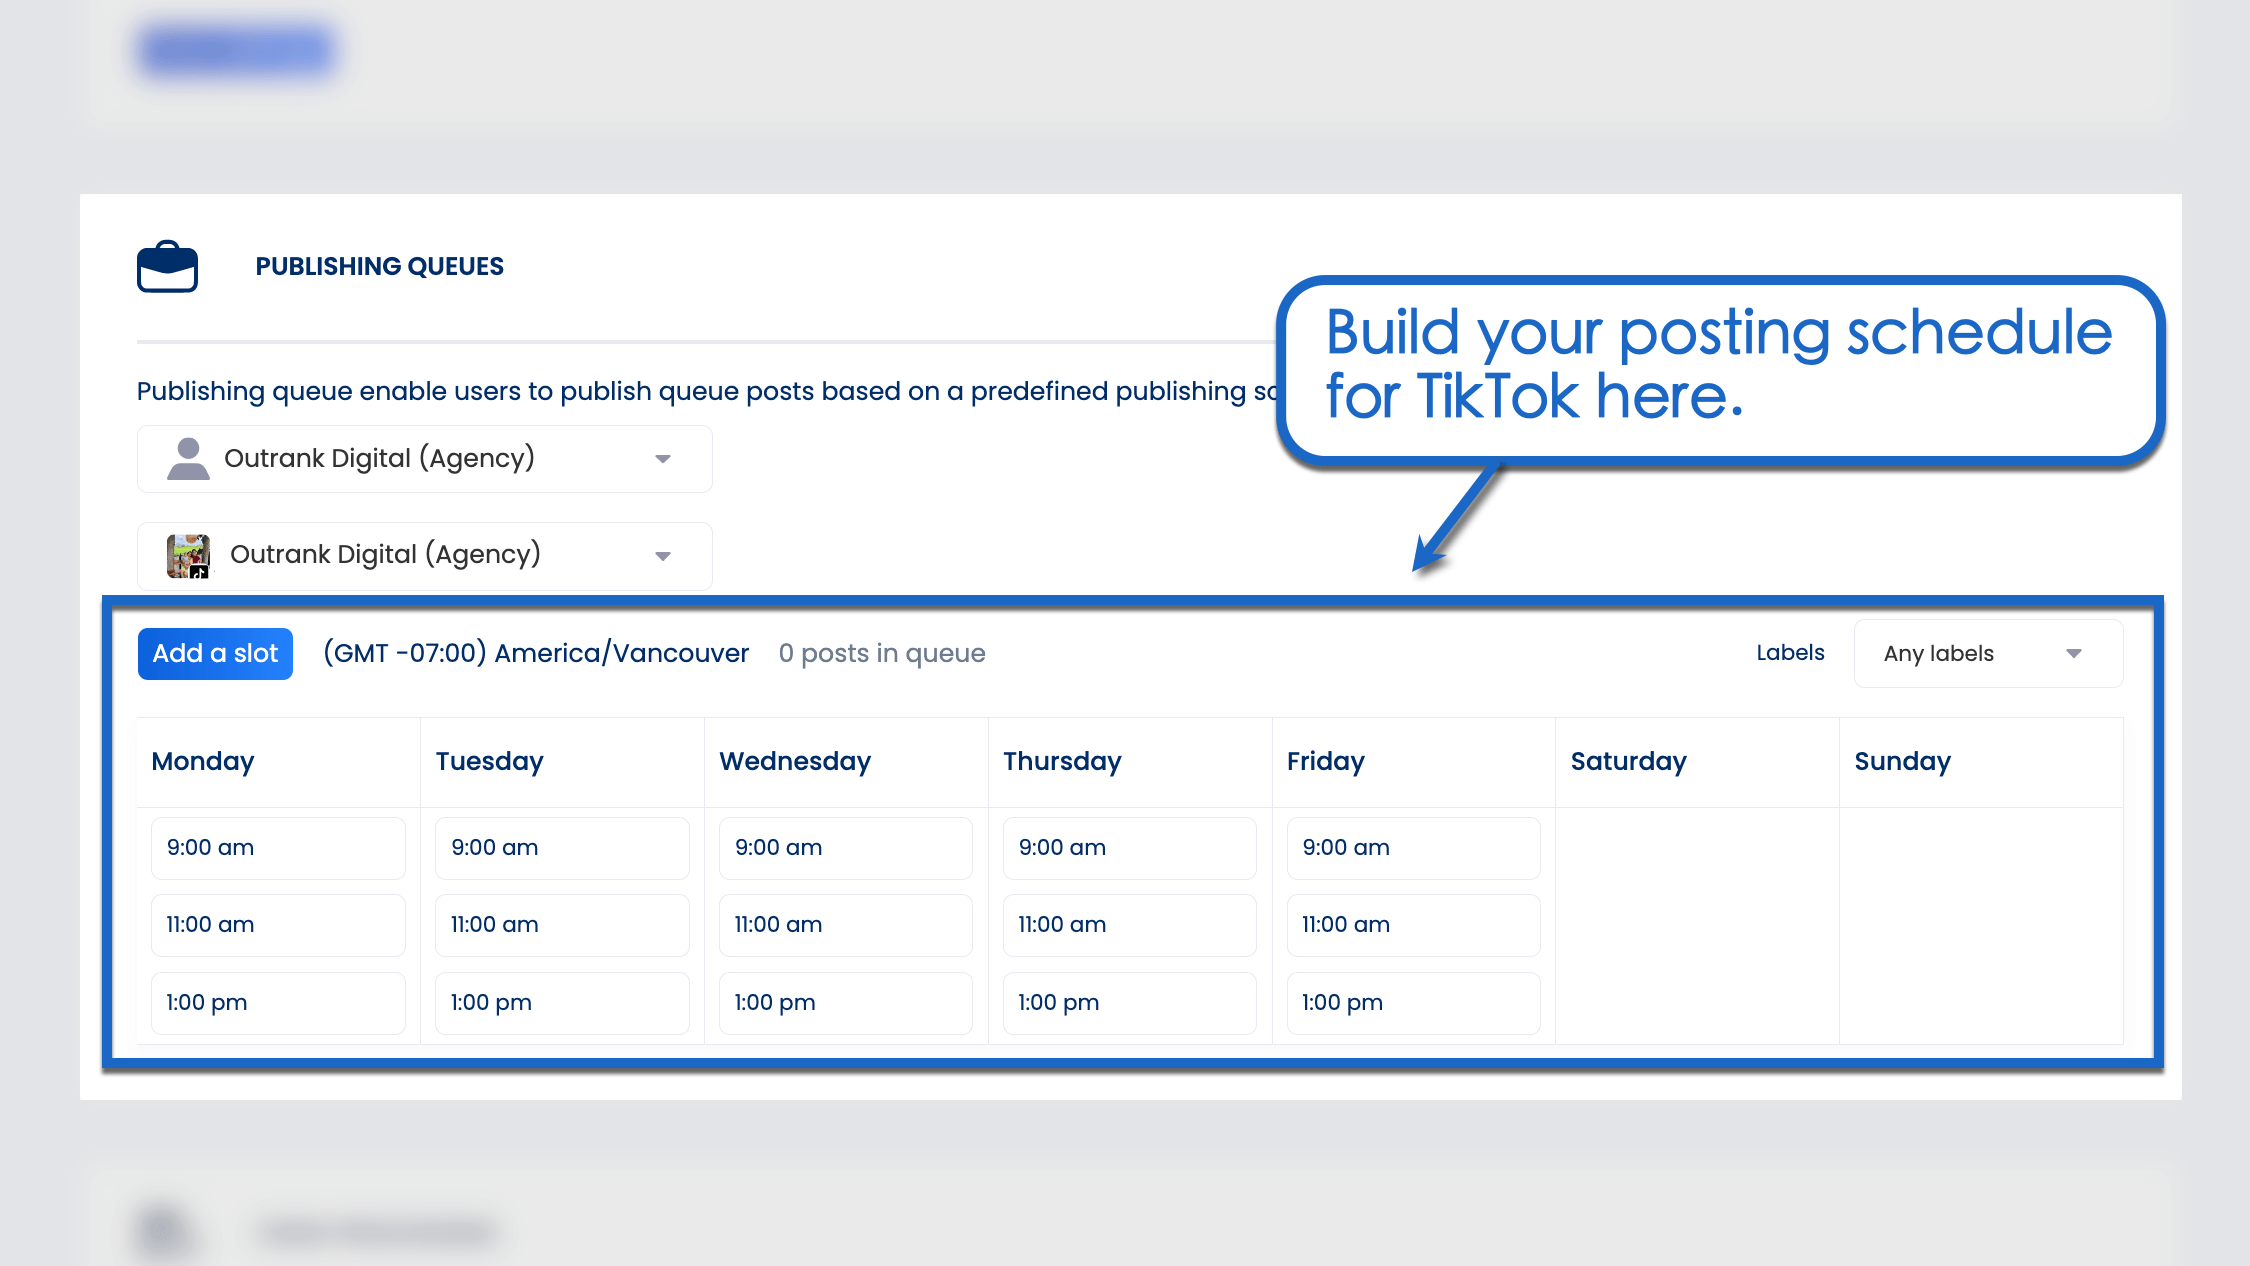 Add a slot' to define a posting time.